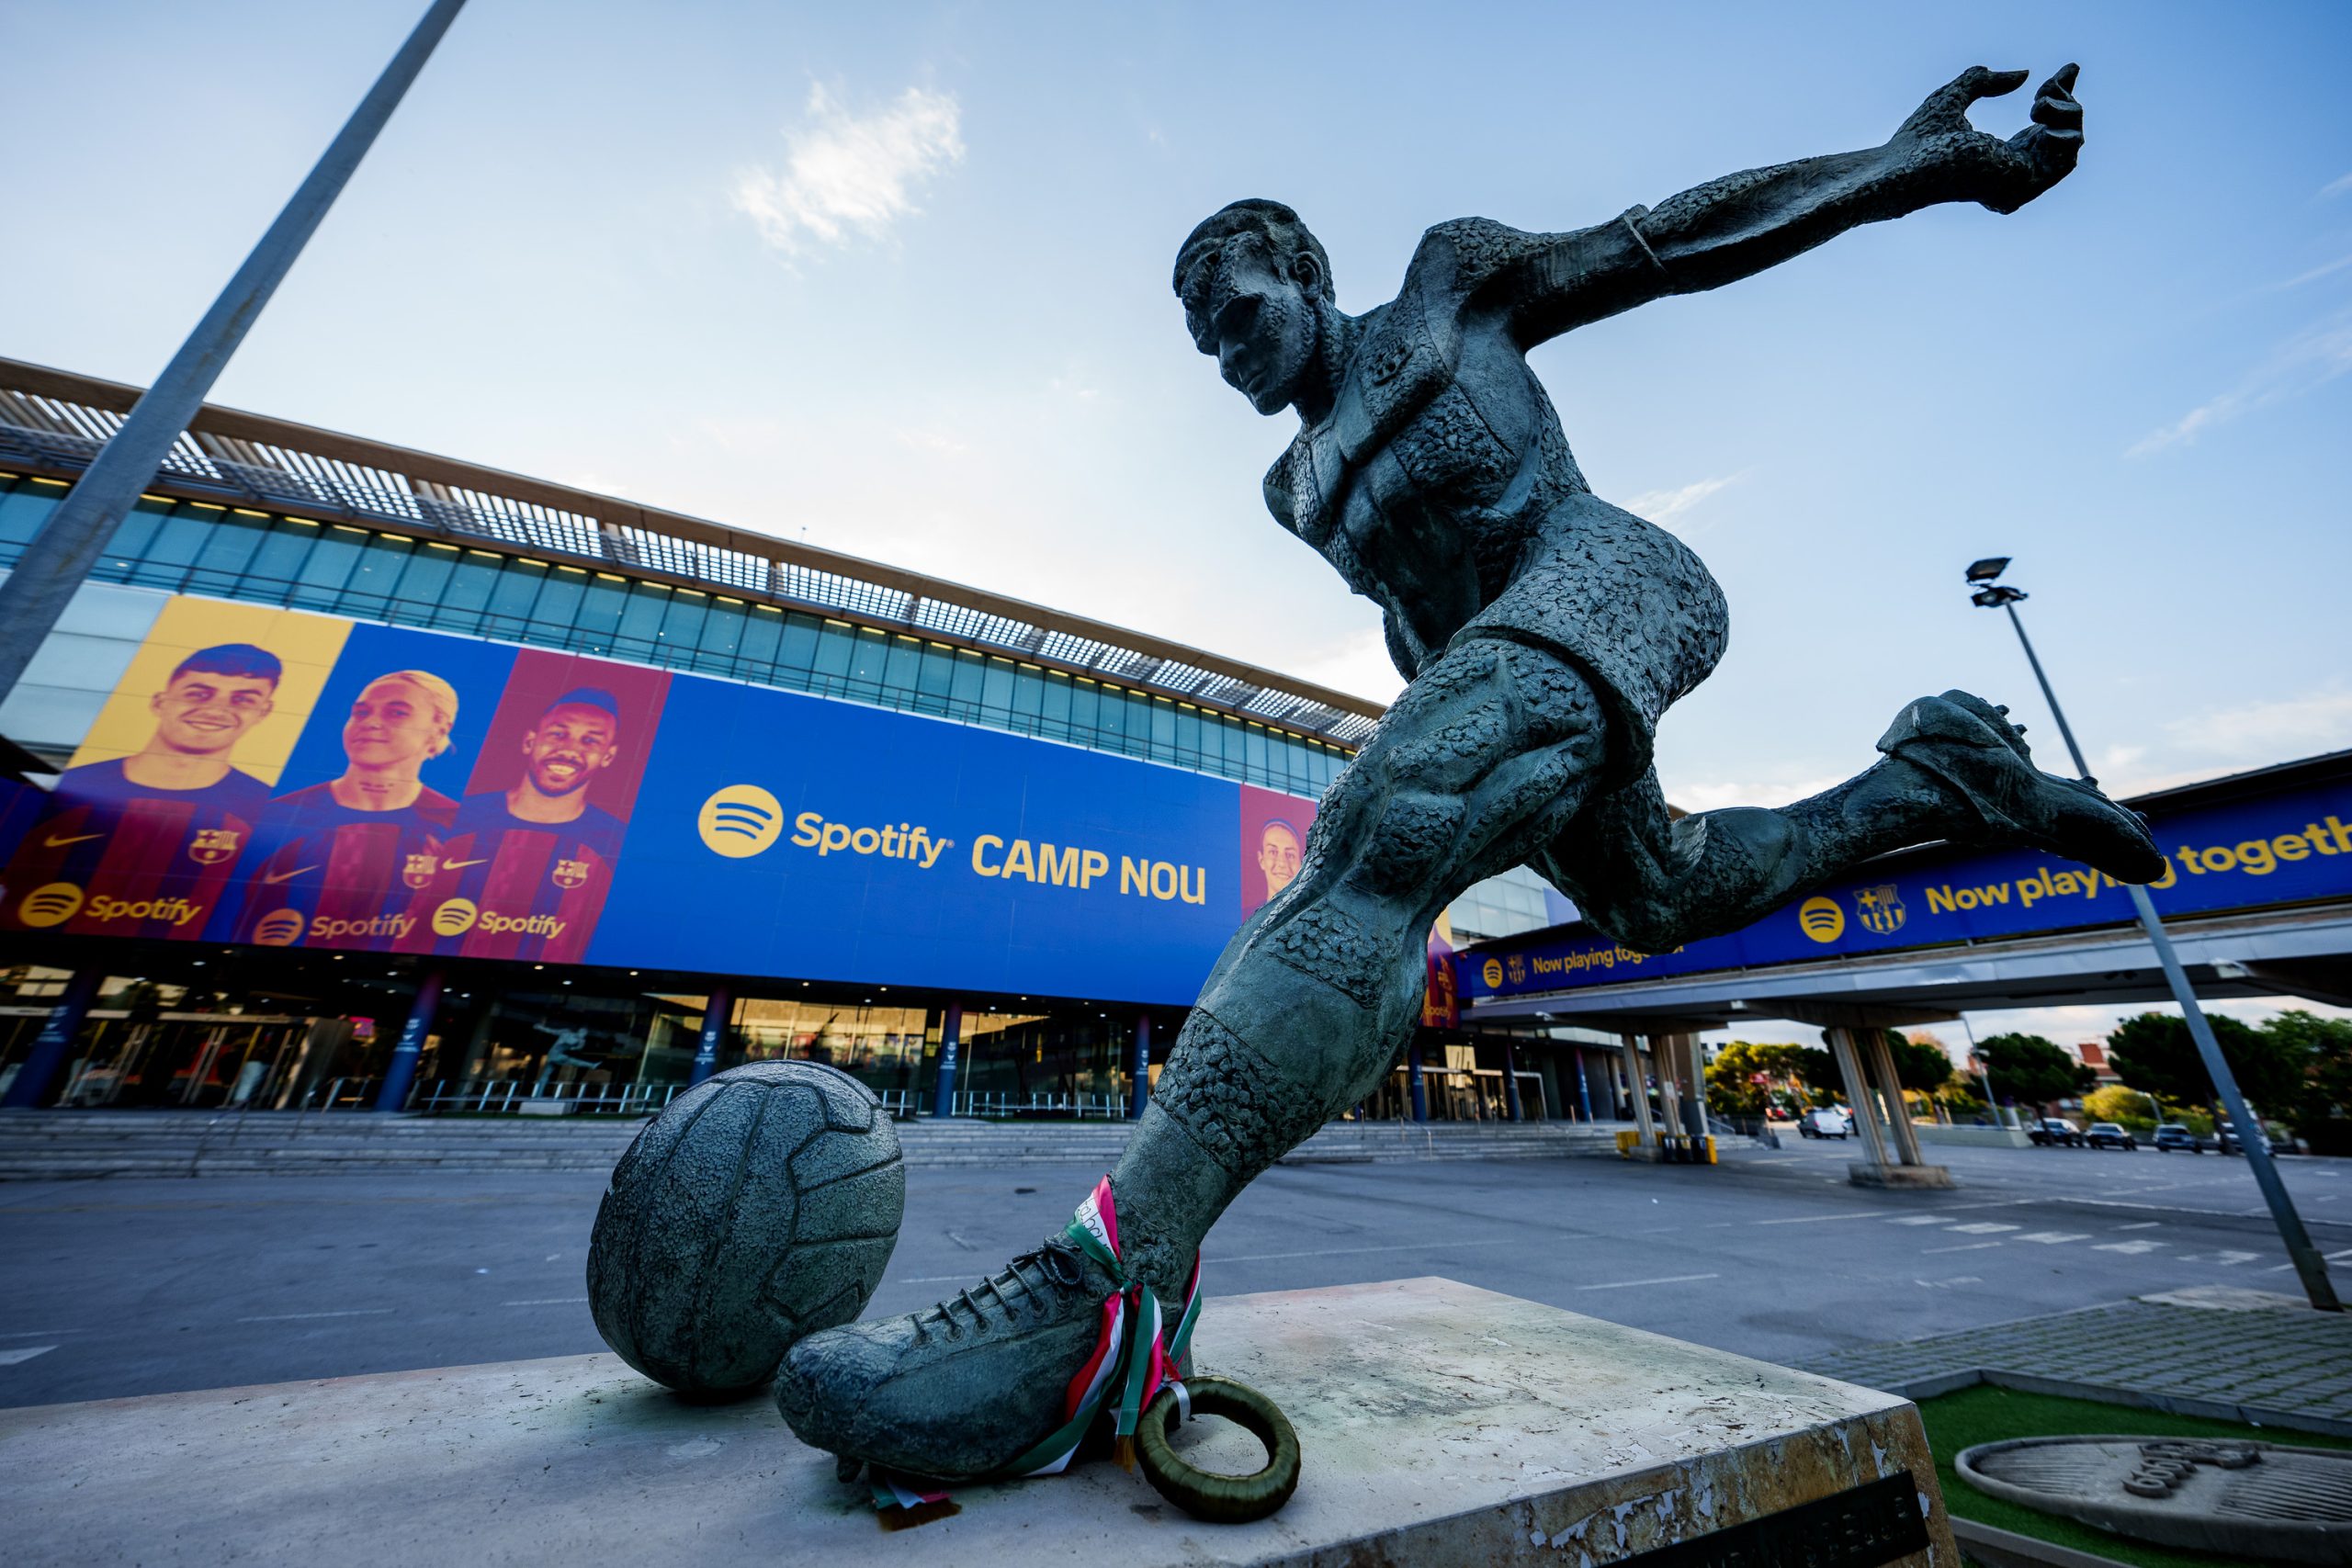 Spotify Camp Nou with statue from former FC Barcelona player Ladislau Kubala Stecz in front